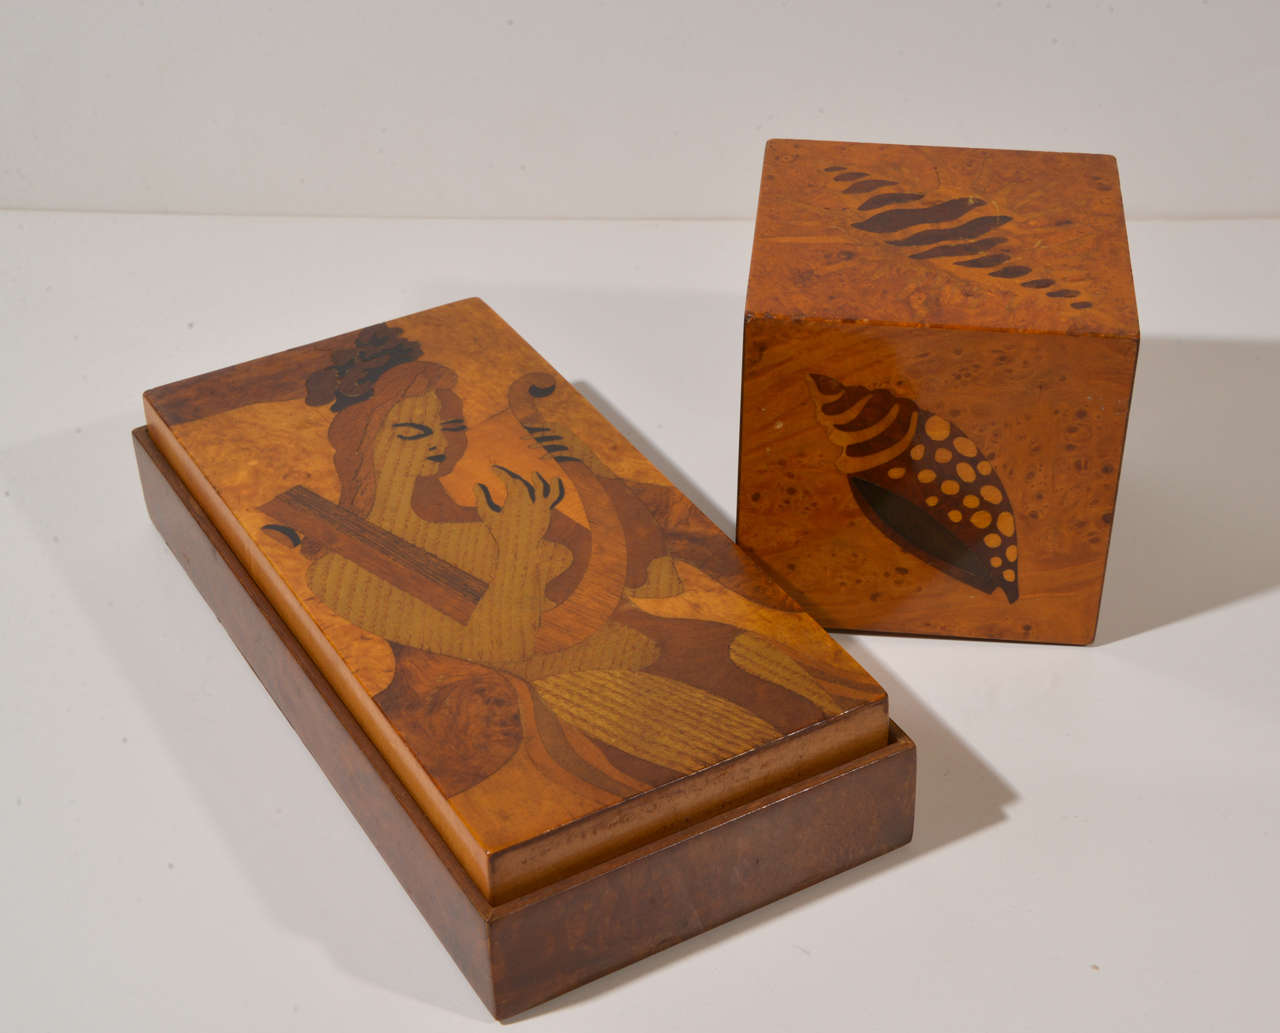 Andrew Szoeke Art Deco Mid Century Modern mixed wood Marquetry Pieces
Signed original Szoeke pieces.  
Amazing marquetry work.

Playing card or cigarette box and desk-top weight.  Paper weight.

BOX: 9